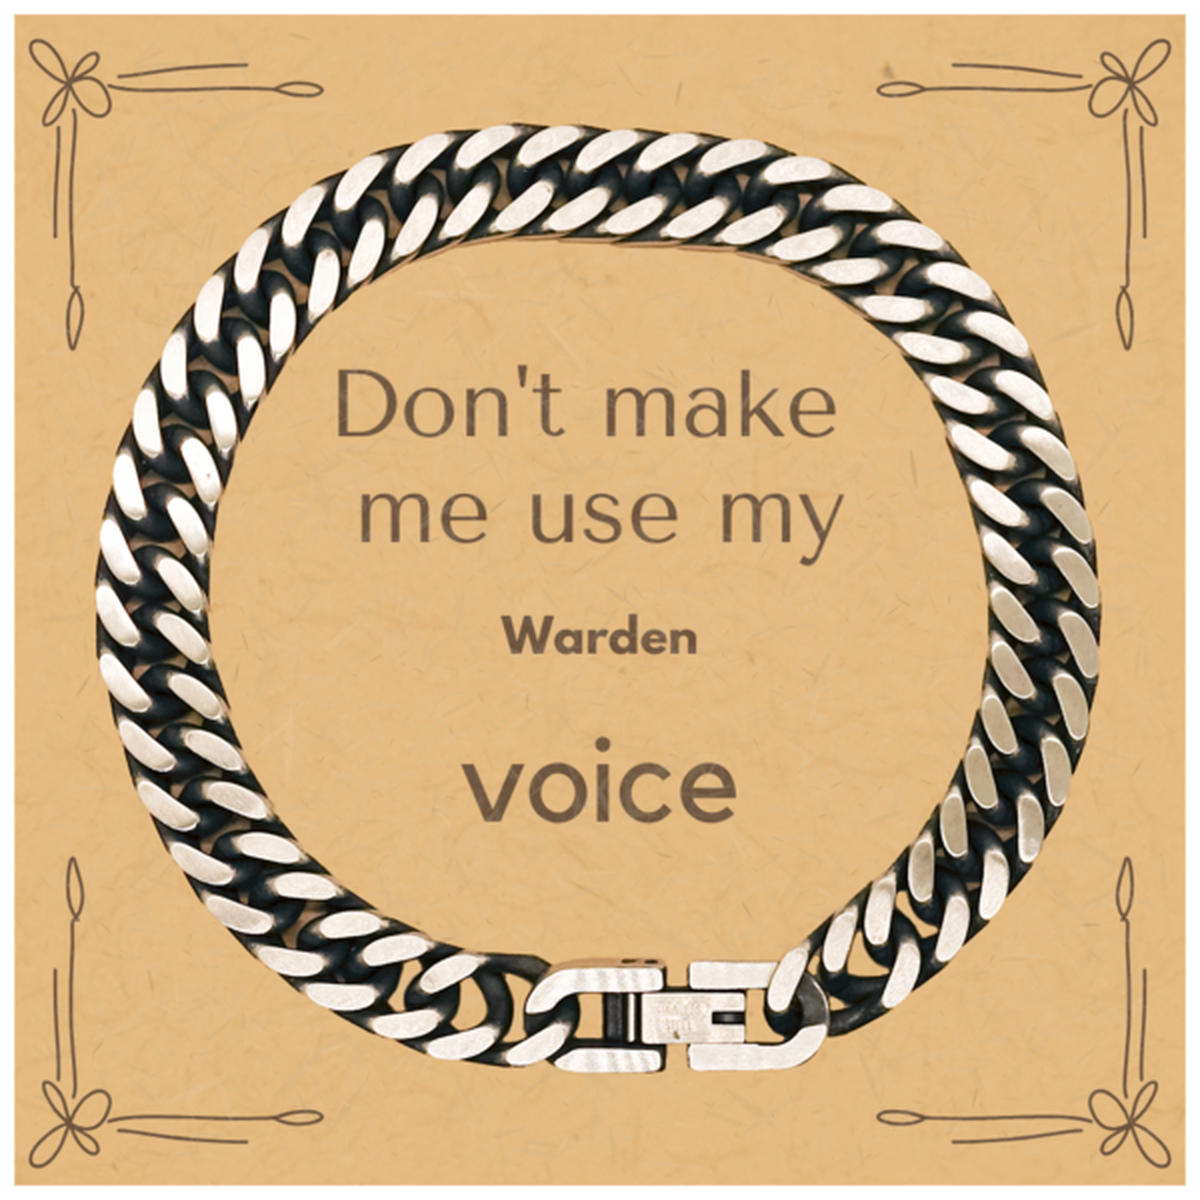 Don't make me use my Warden voice, Sarcasm Warden Card Gifts, Christmas Warden Cuban Link Chain Bracelet Birthday Unique Gifts For Warden Coworkers, Men, Women, Colleague, Friends